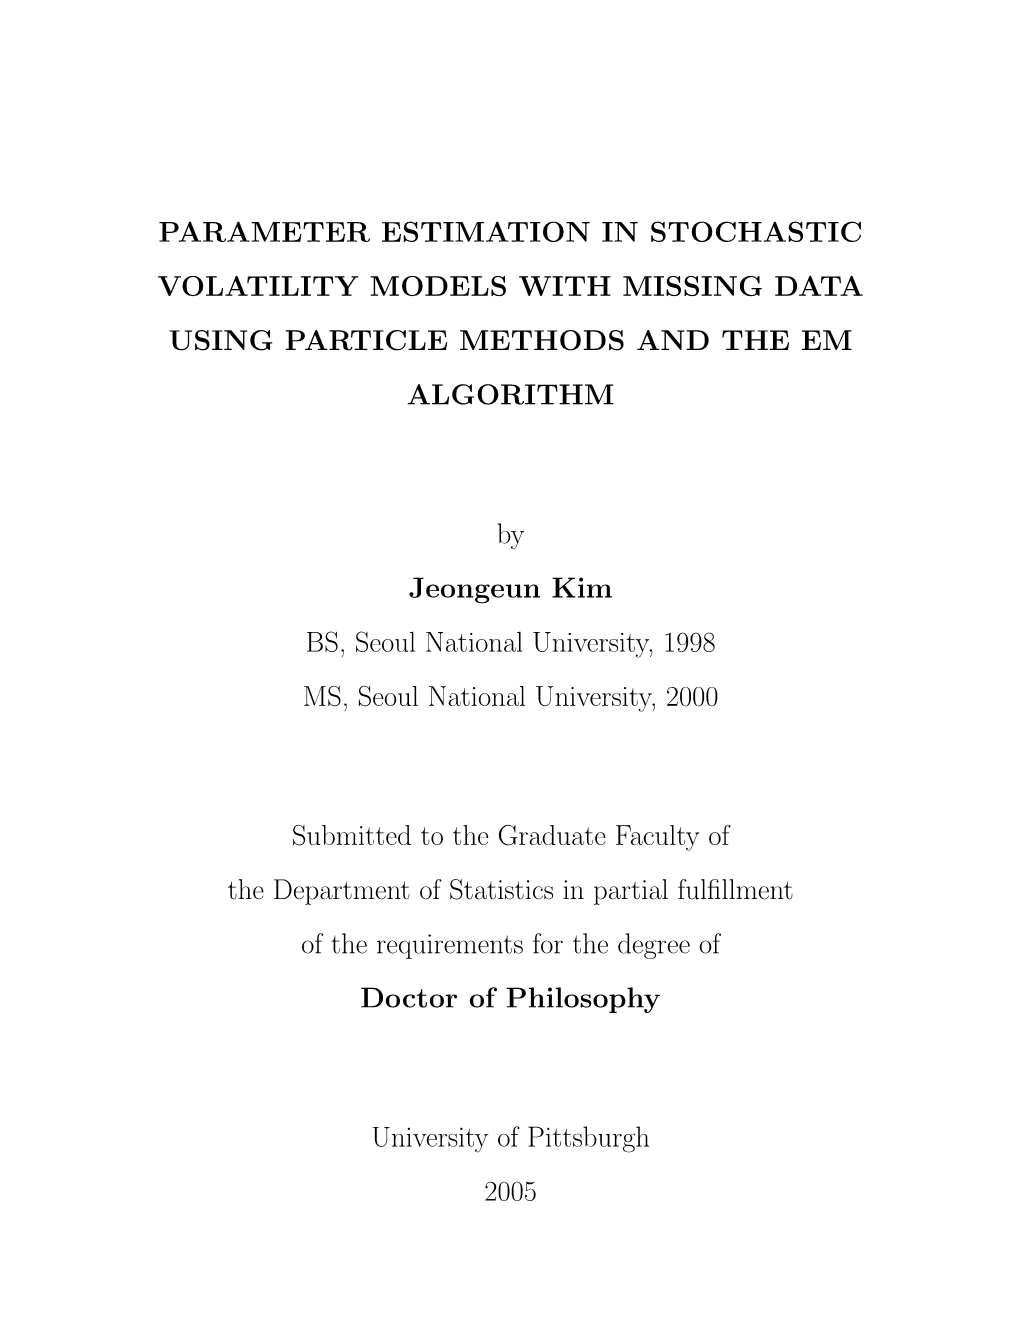 Parameter Estimation in Stochastic Volatility Models with Missing Data Using Particle Methods and the Em Algorithm